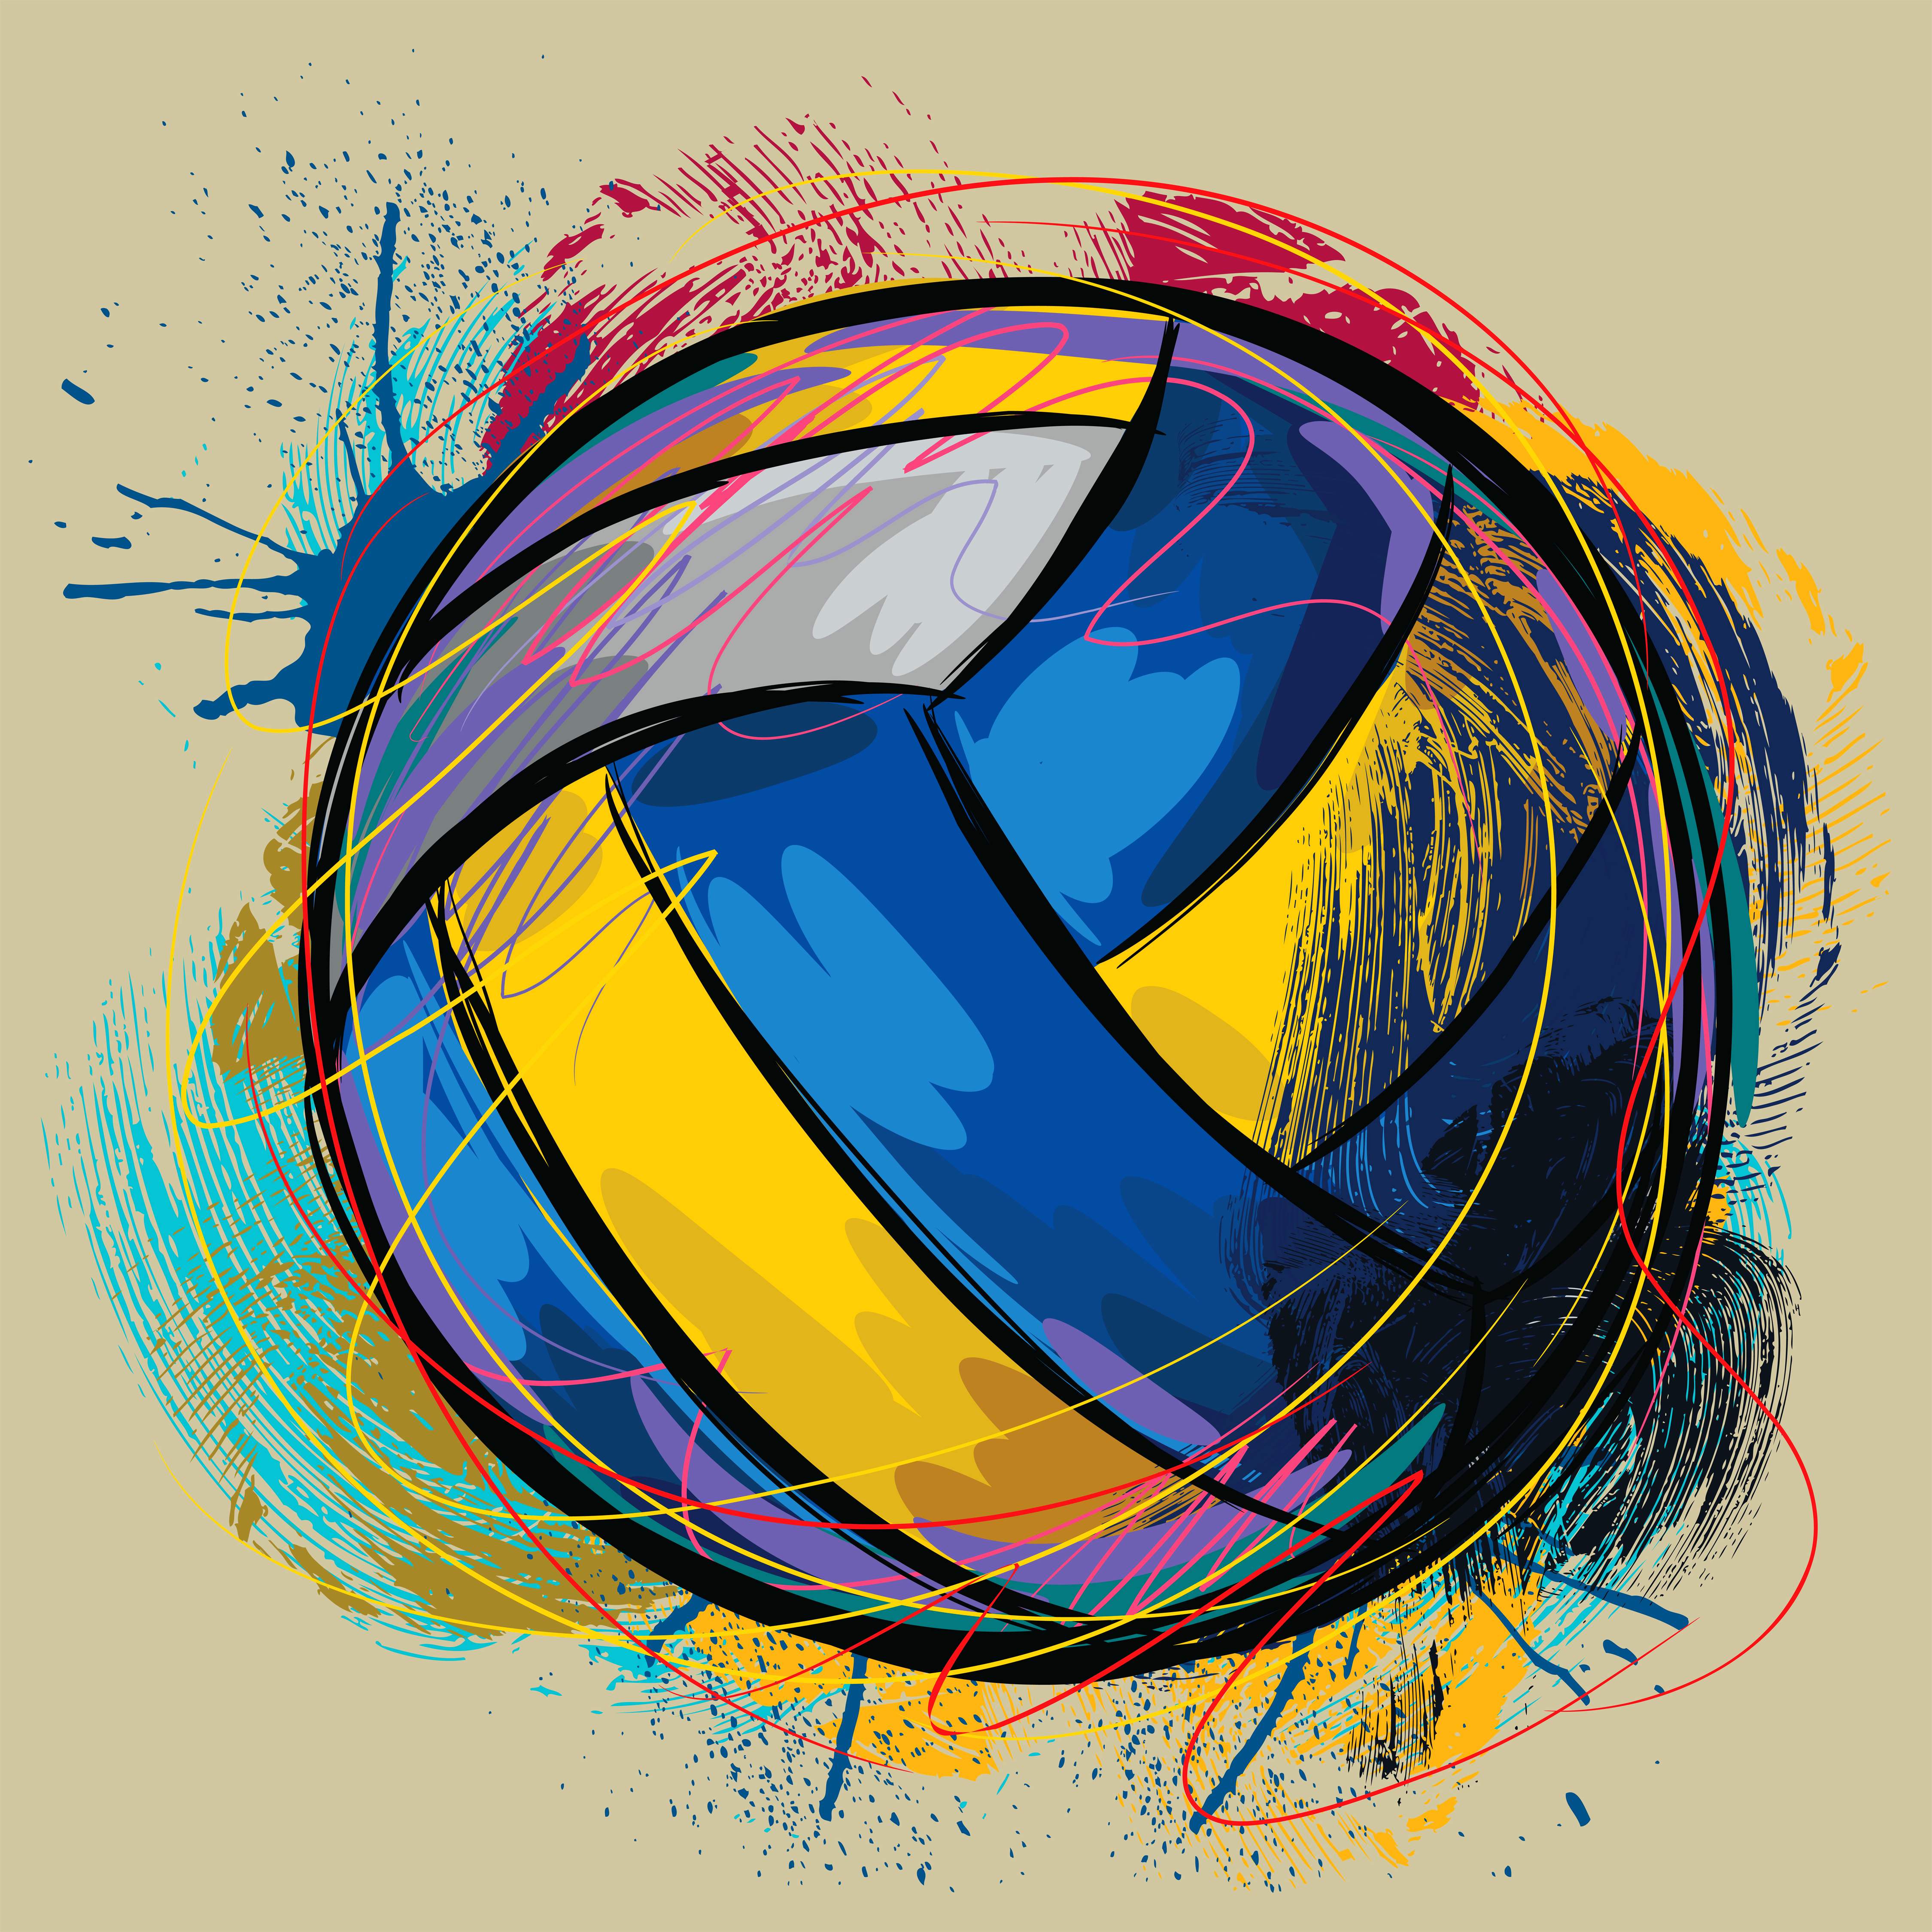 Volleyball Wallpaper Images  Free Photos PNG Stickers Wallpapers   Backgrounds  rawpixel